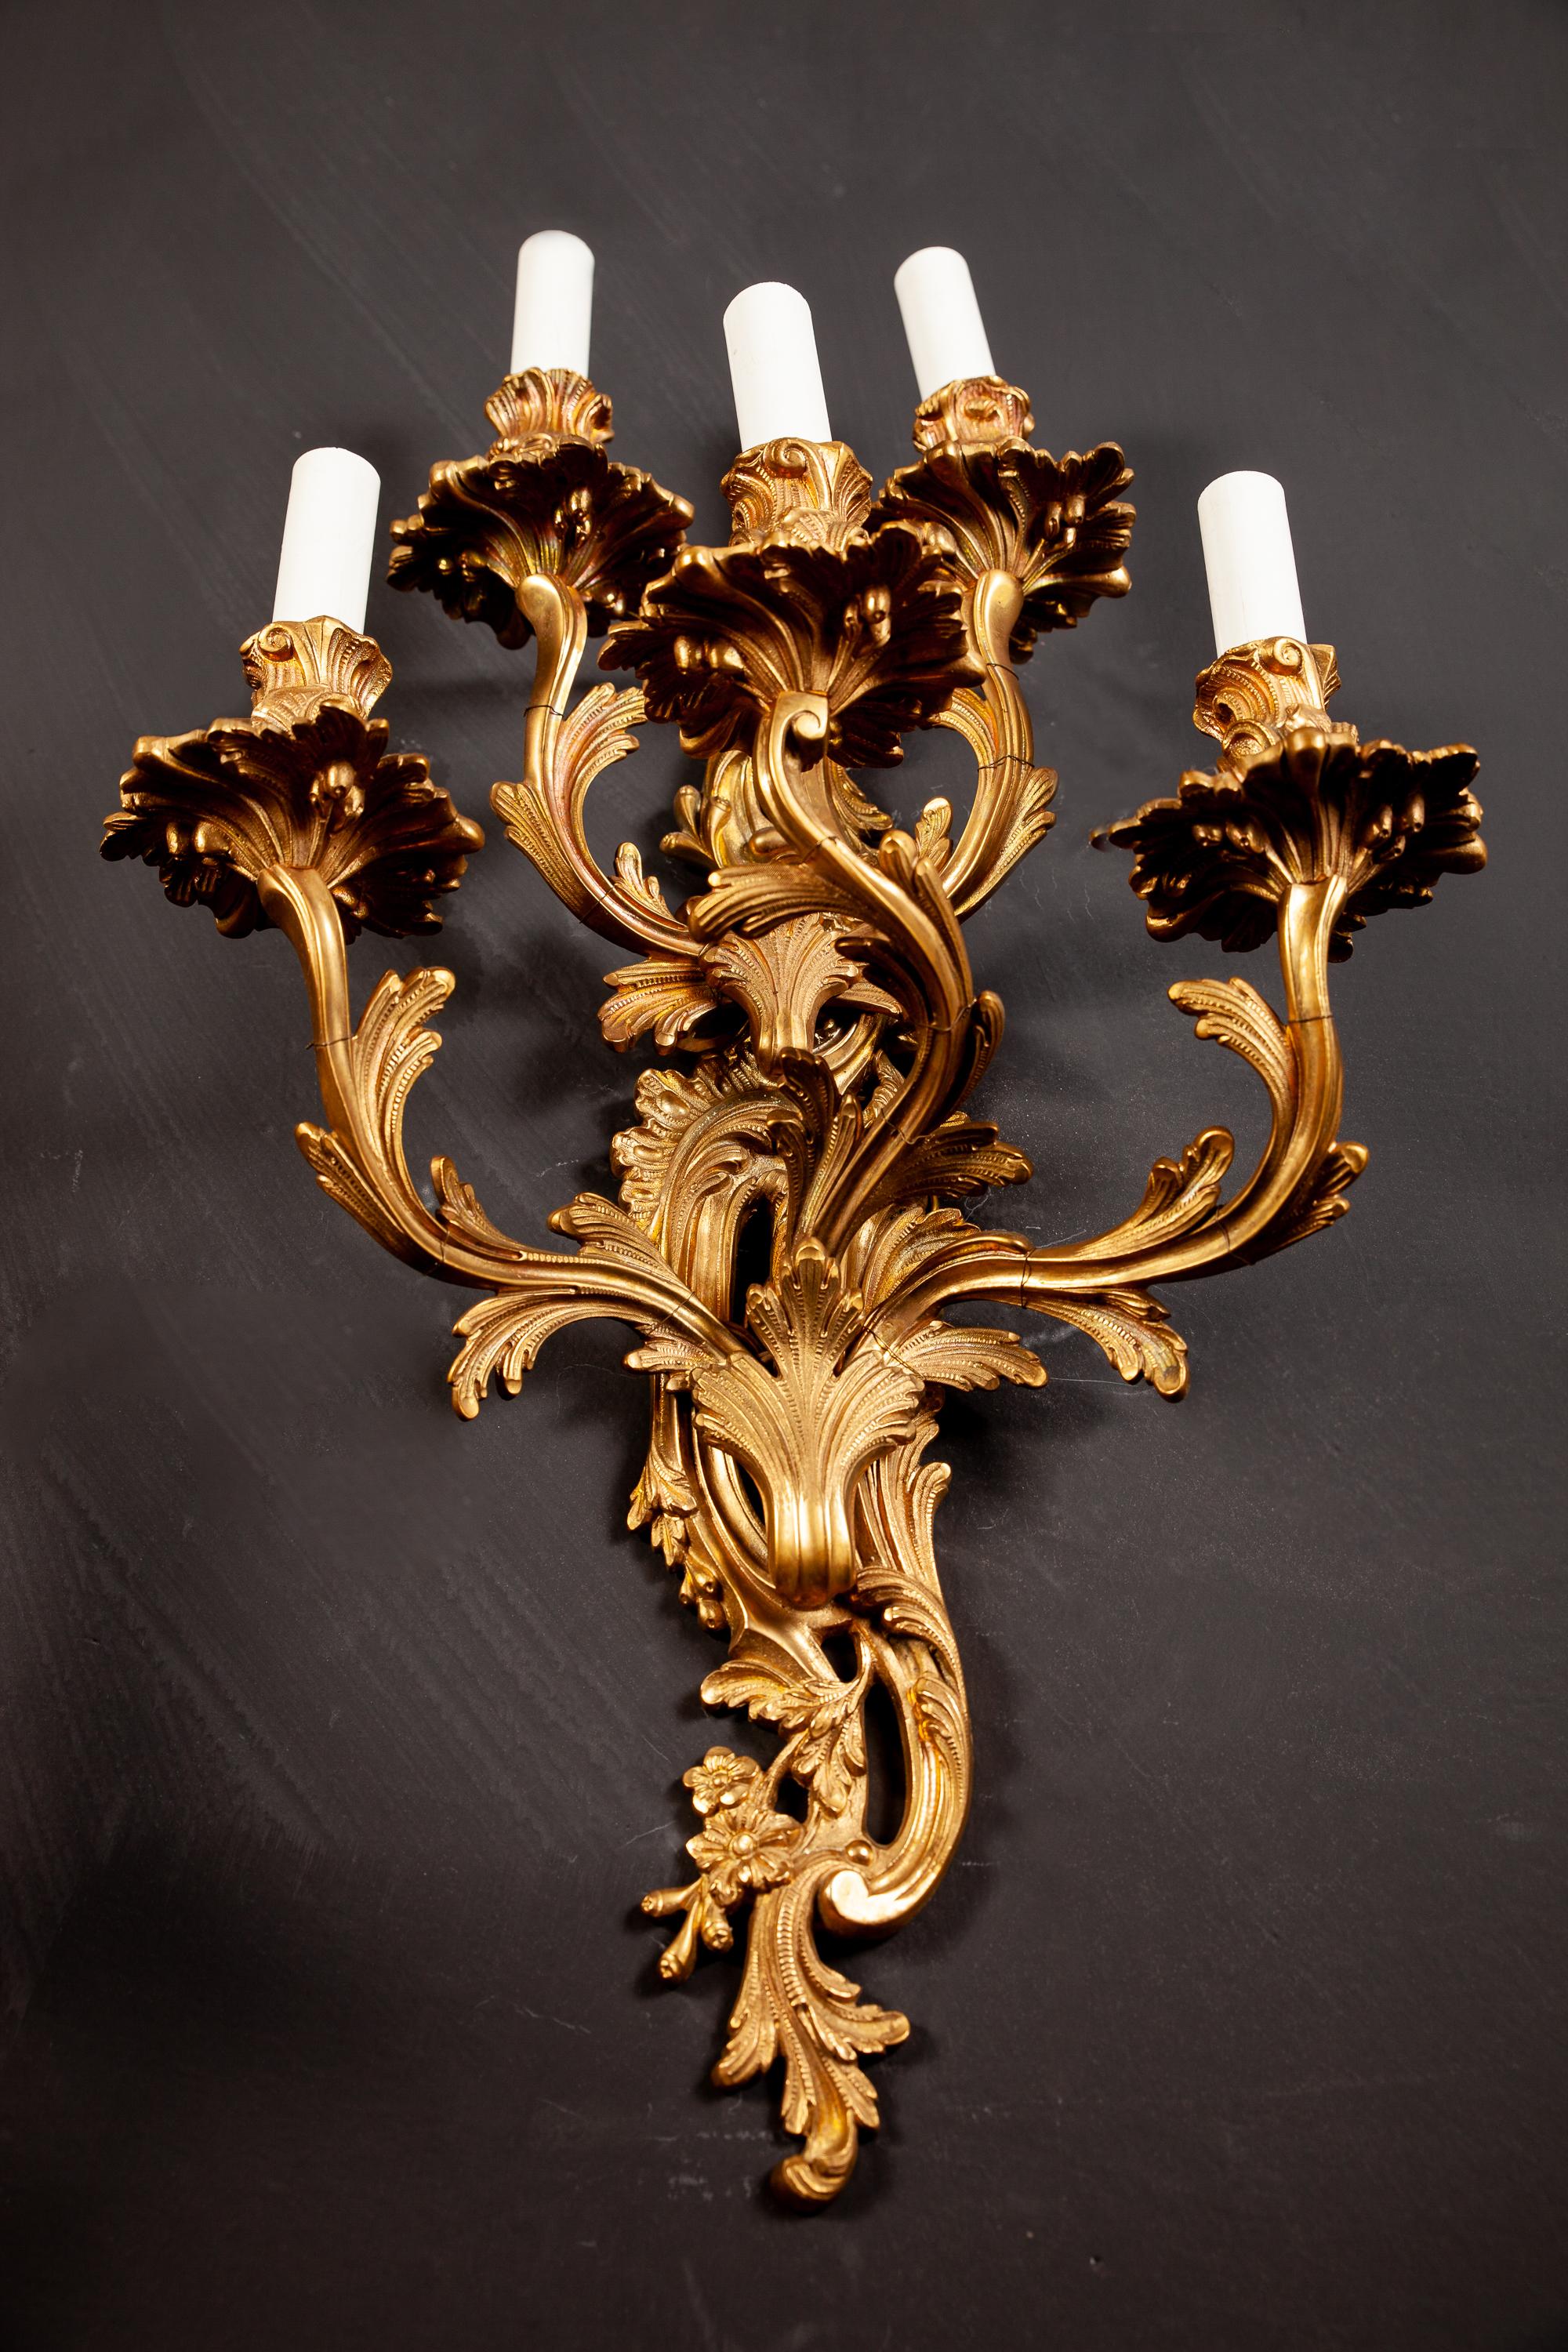 Pair of 19th Century Louis XV Style Gilt Bronze Five Arms French Sconces, 1890s (Vergoldet)